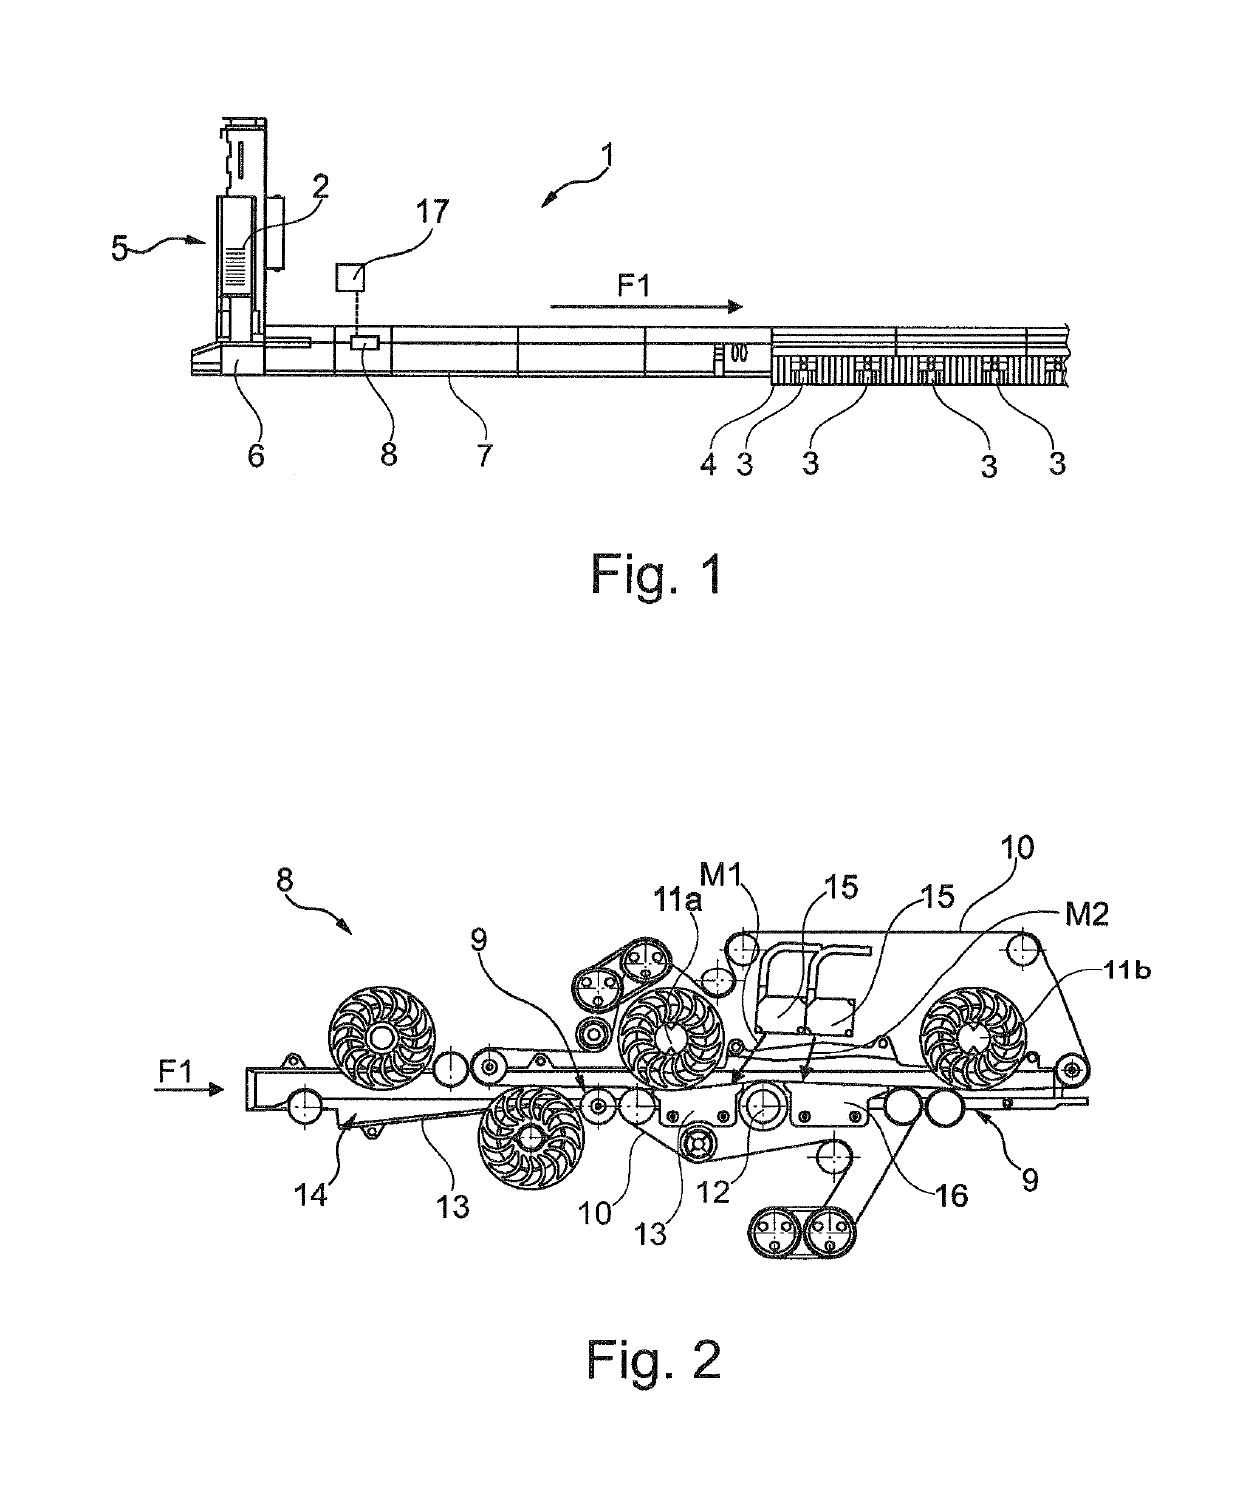 Apparatus for measuring the stiffness of mailpieces